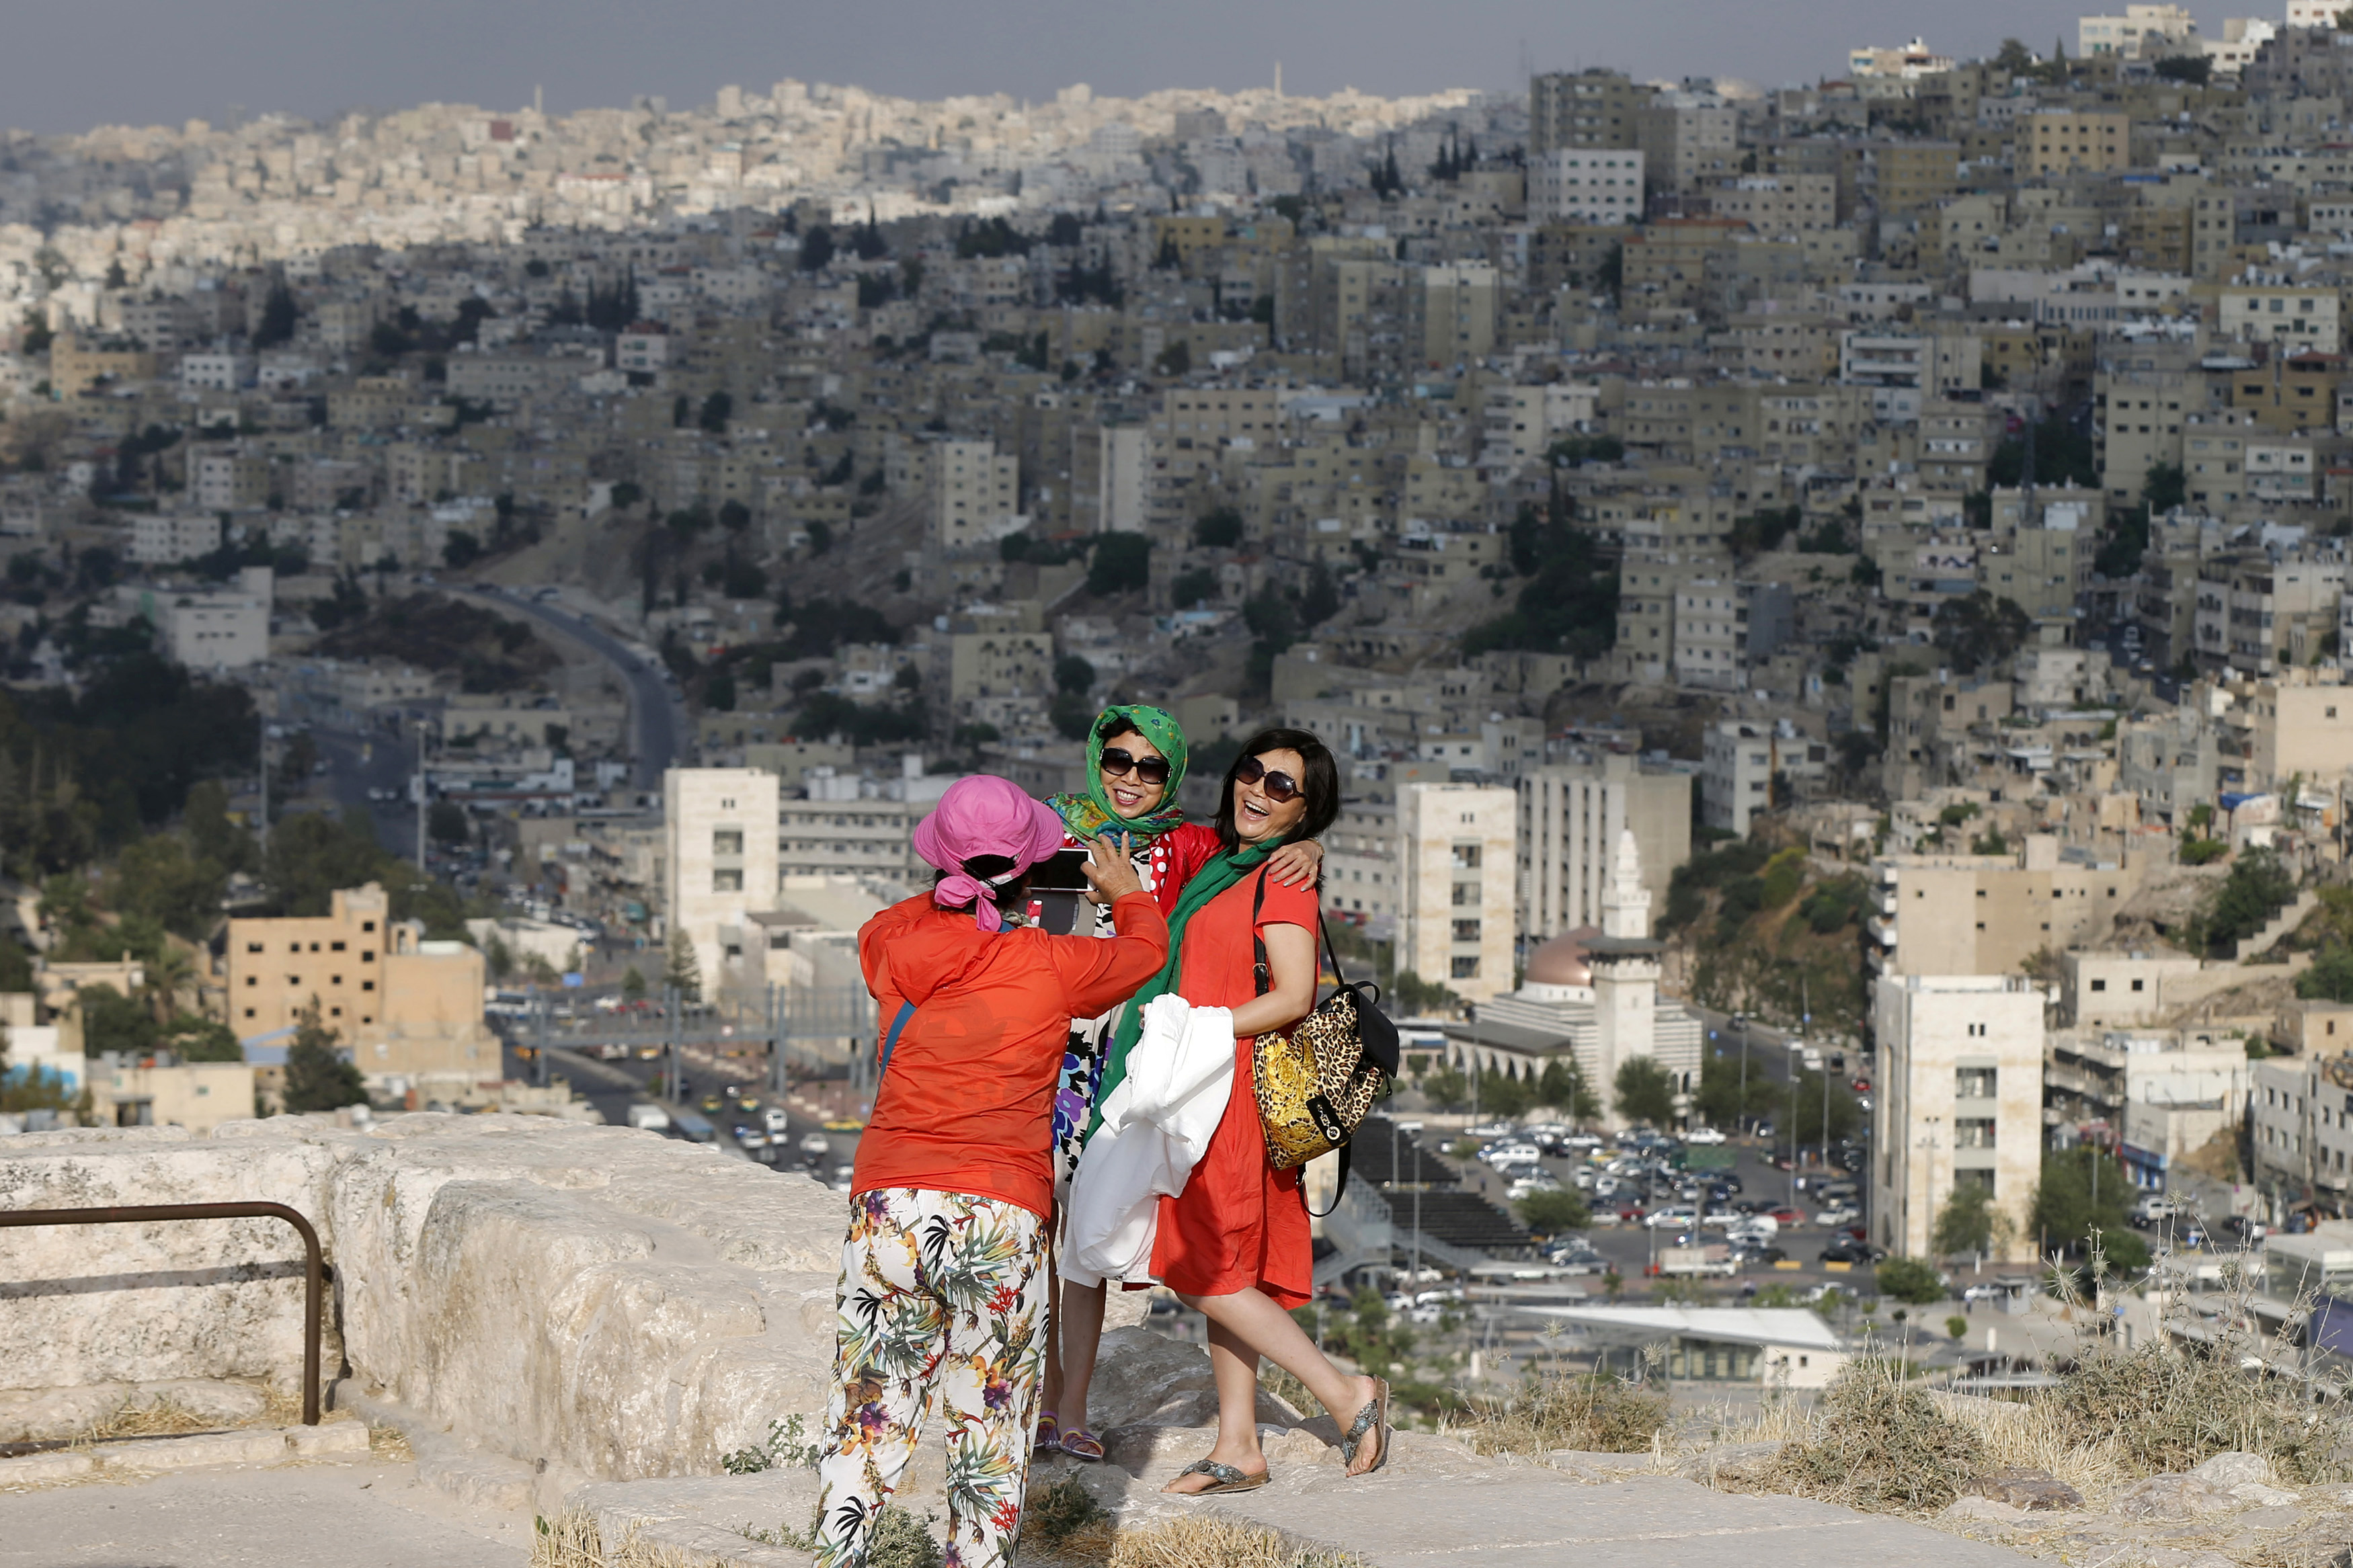 Chinese tourists take pictures during their visit to the Amman Citadel, an ancient Roman landmark in Amman